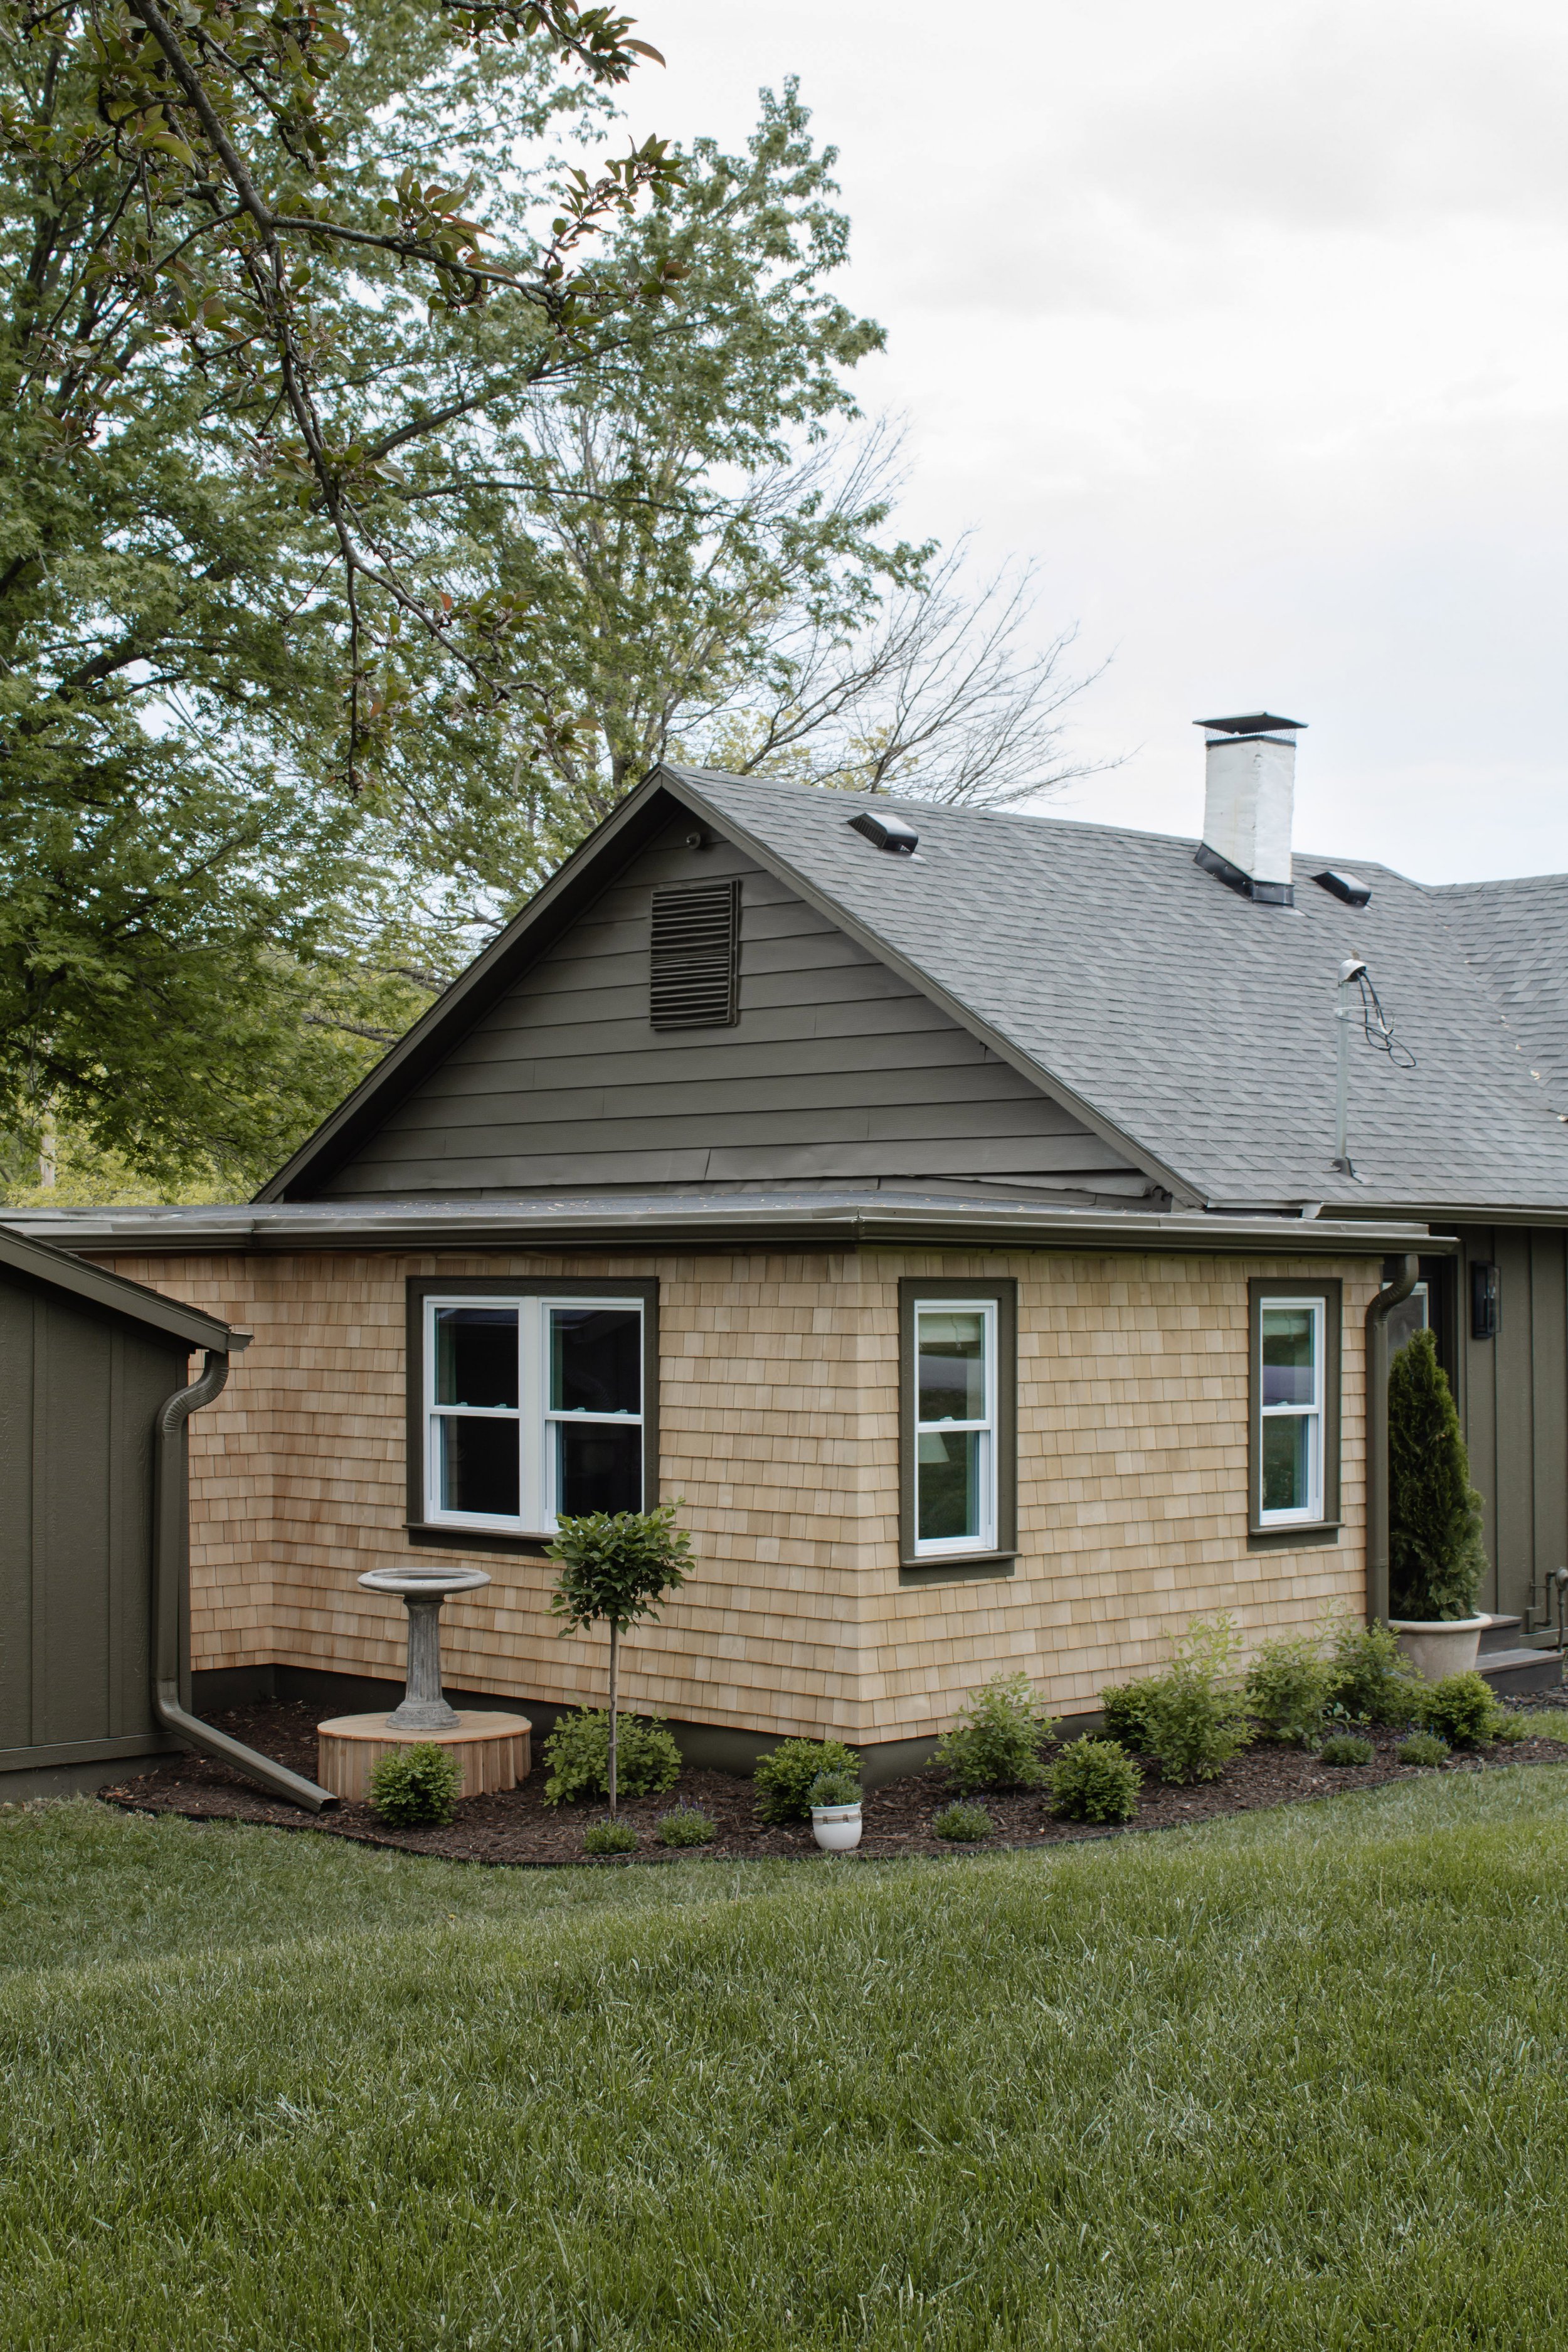 How our cedar shake siding color has changed after 3 years. Cedar siding FAQ's. How fast do cedar shake shingles gray? | Nadine Stay